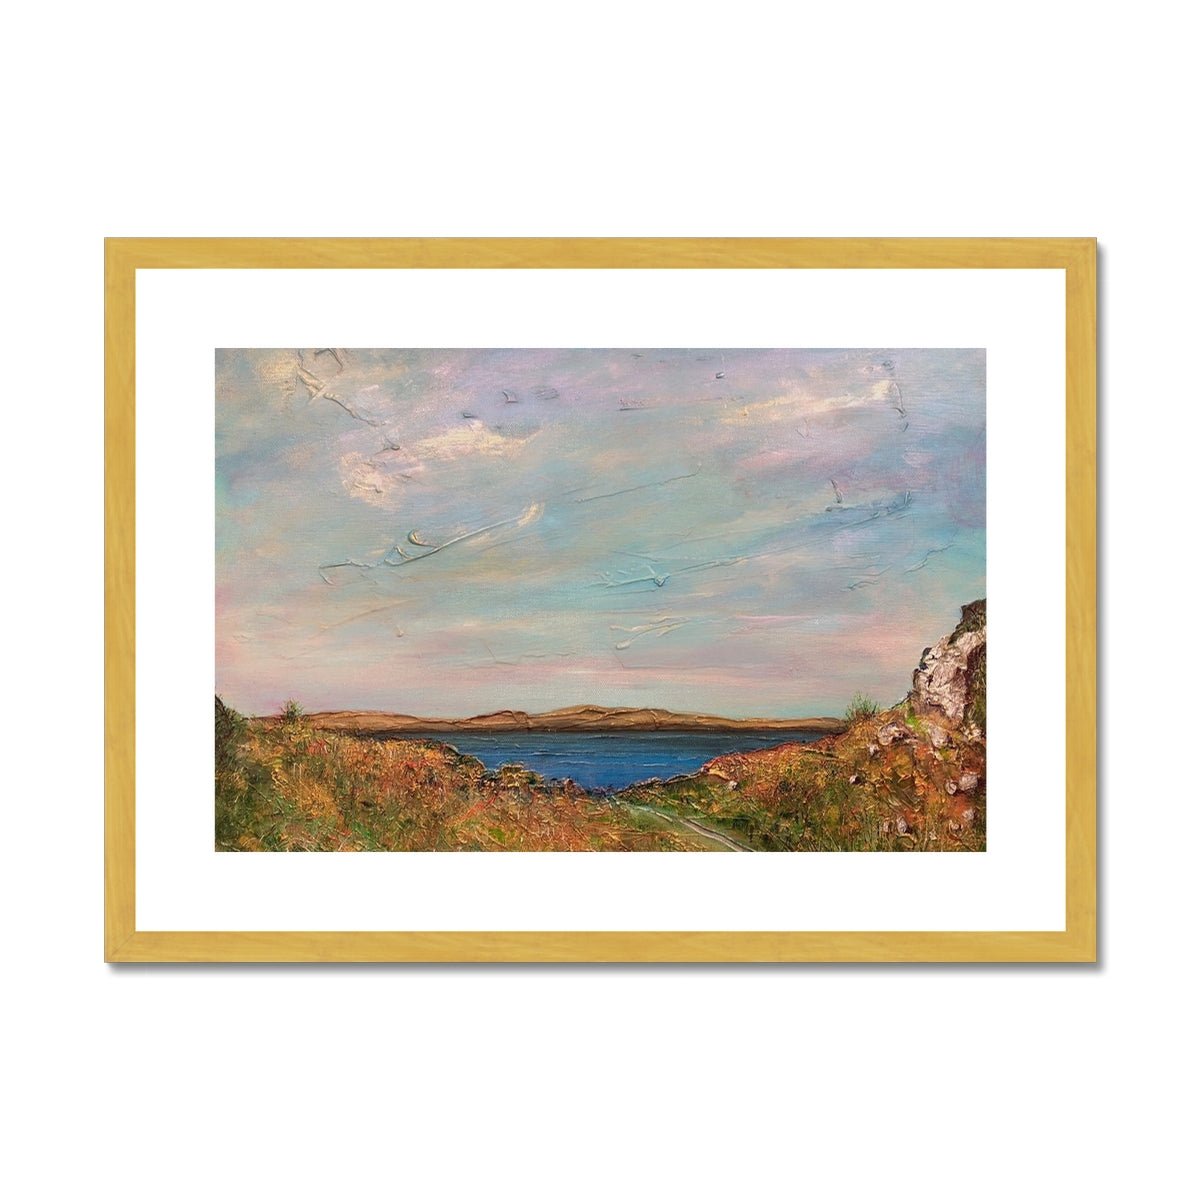 Jura From Crinan Painting | Antique Framed & Mounted Prints From Scotland-Antique Framed & Mounted Prints-Hebridean Islands Art Gallery-A2 Landscape-Gold Frame-Paintings, Prints, Homeware, Art Gifts From Scotland By Scottish Artist Kevin Hunter